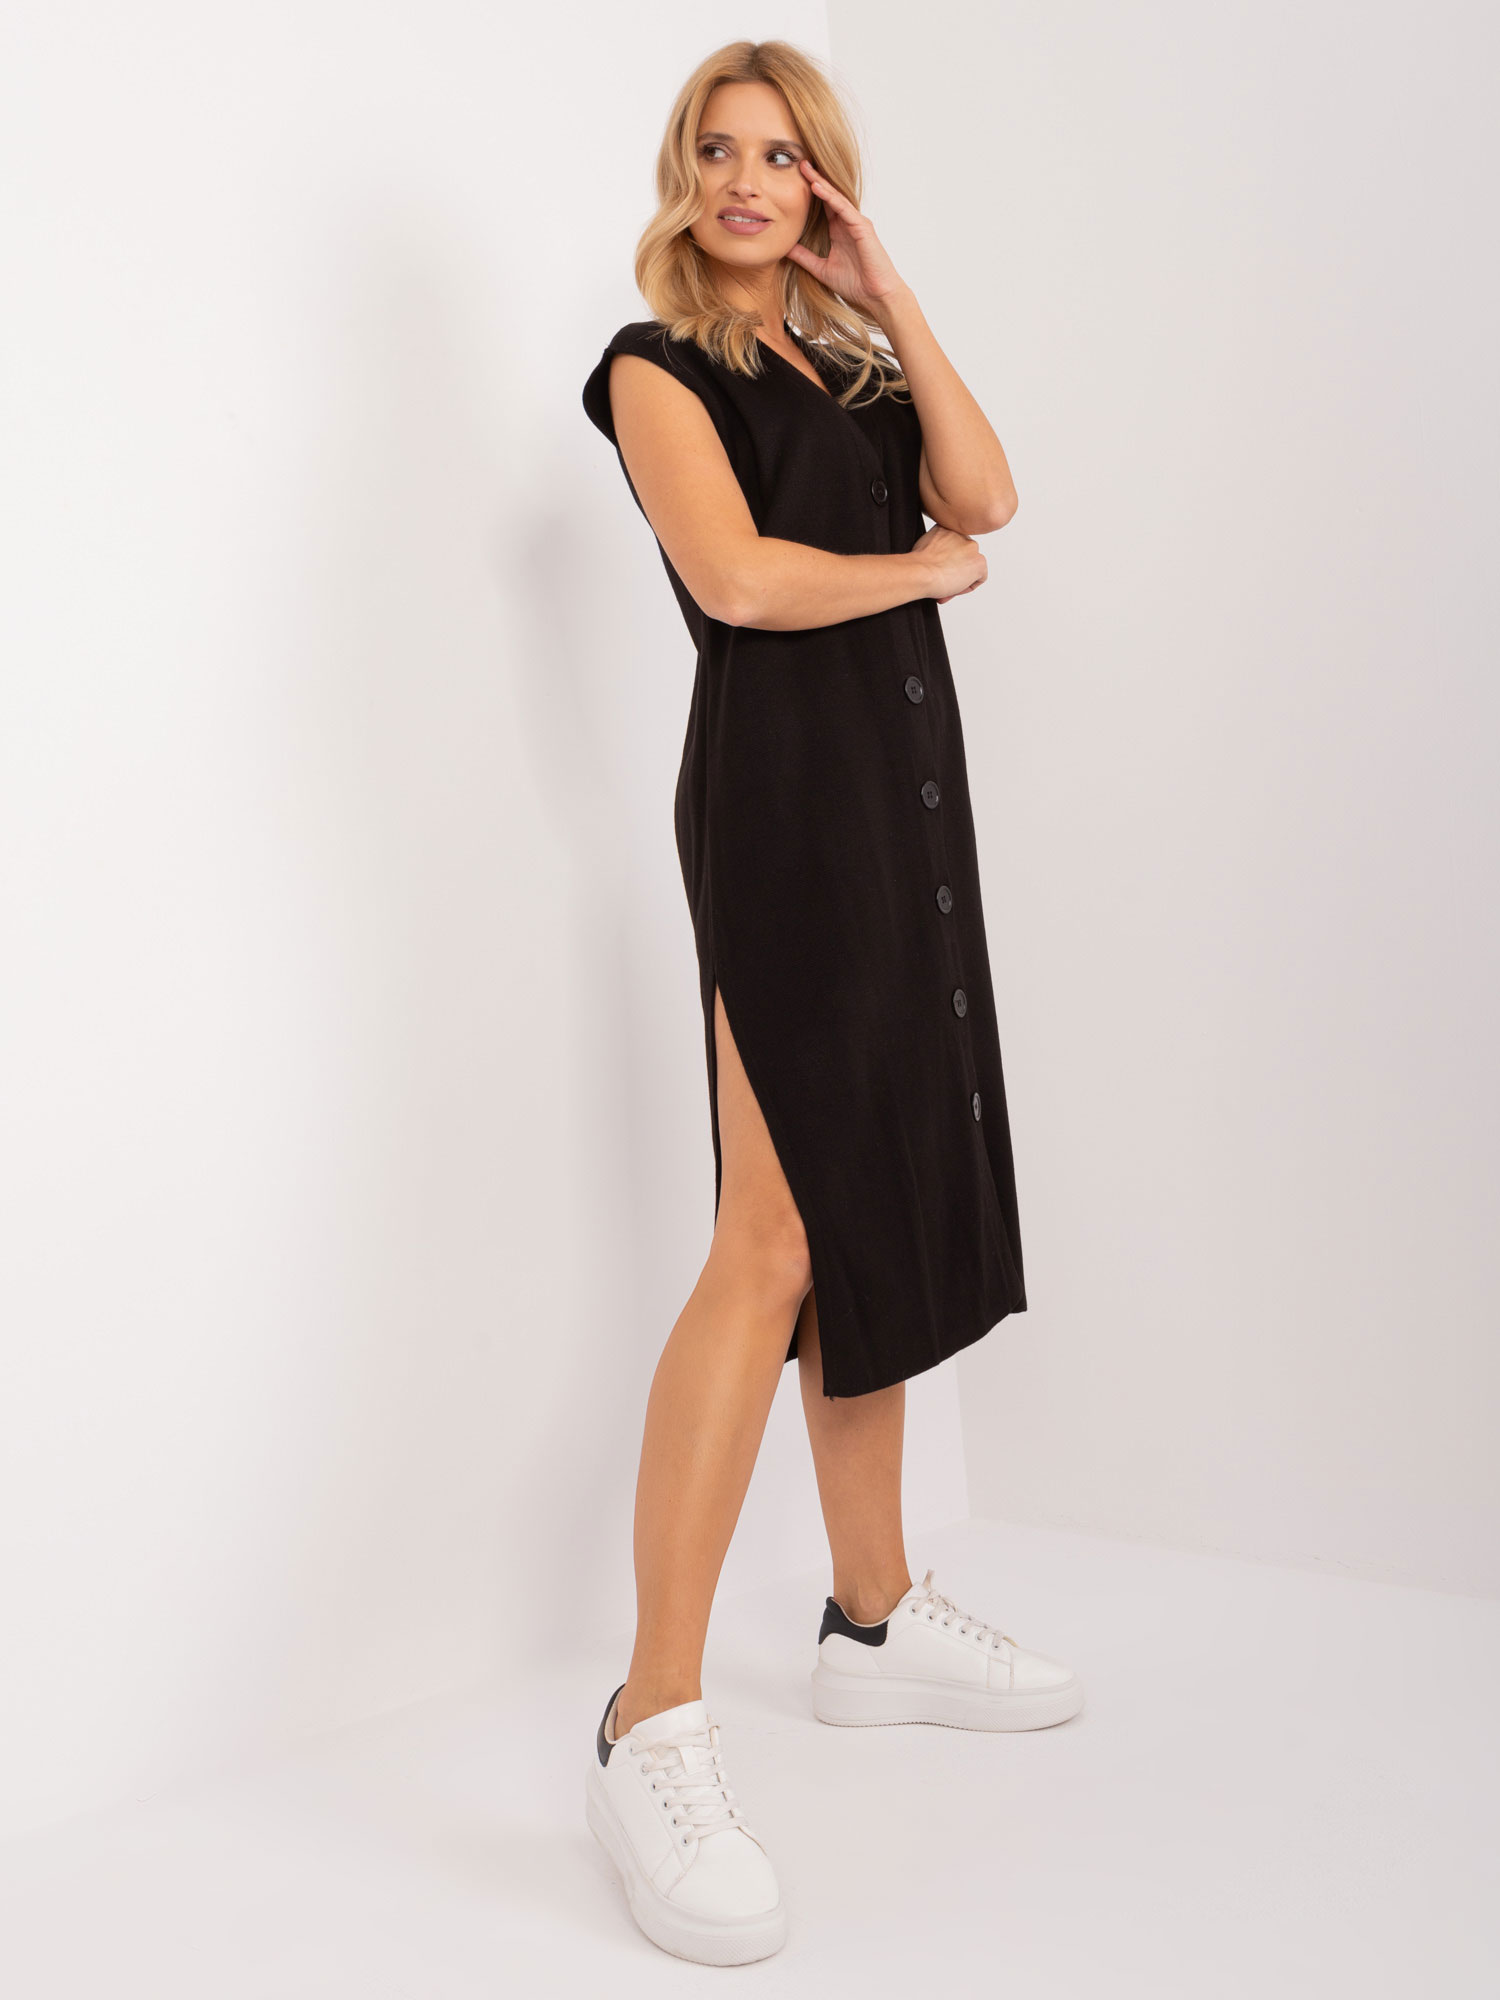 Black knitted dress with wool